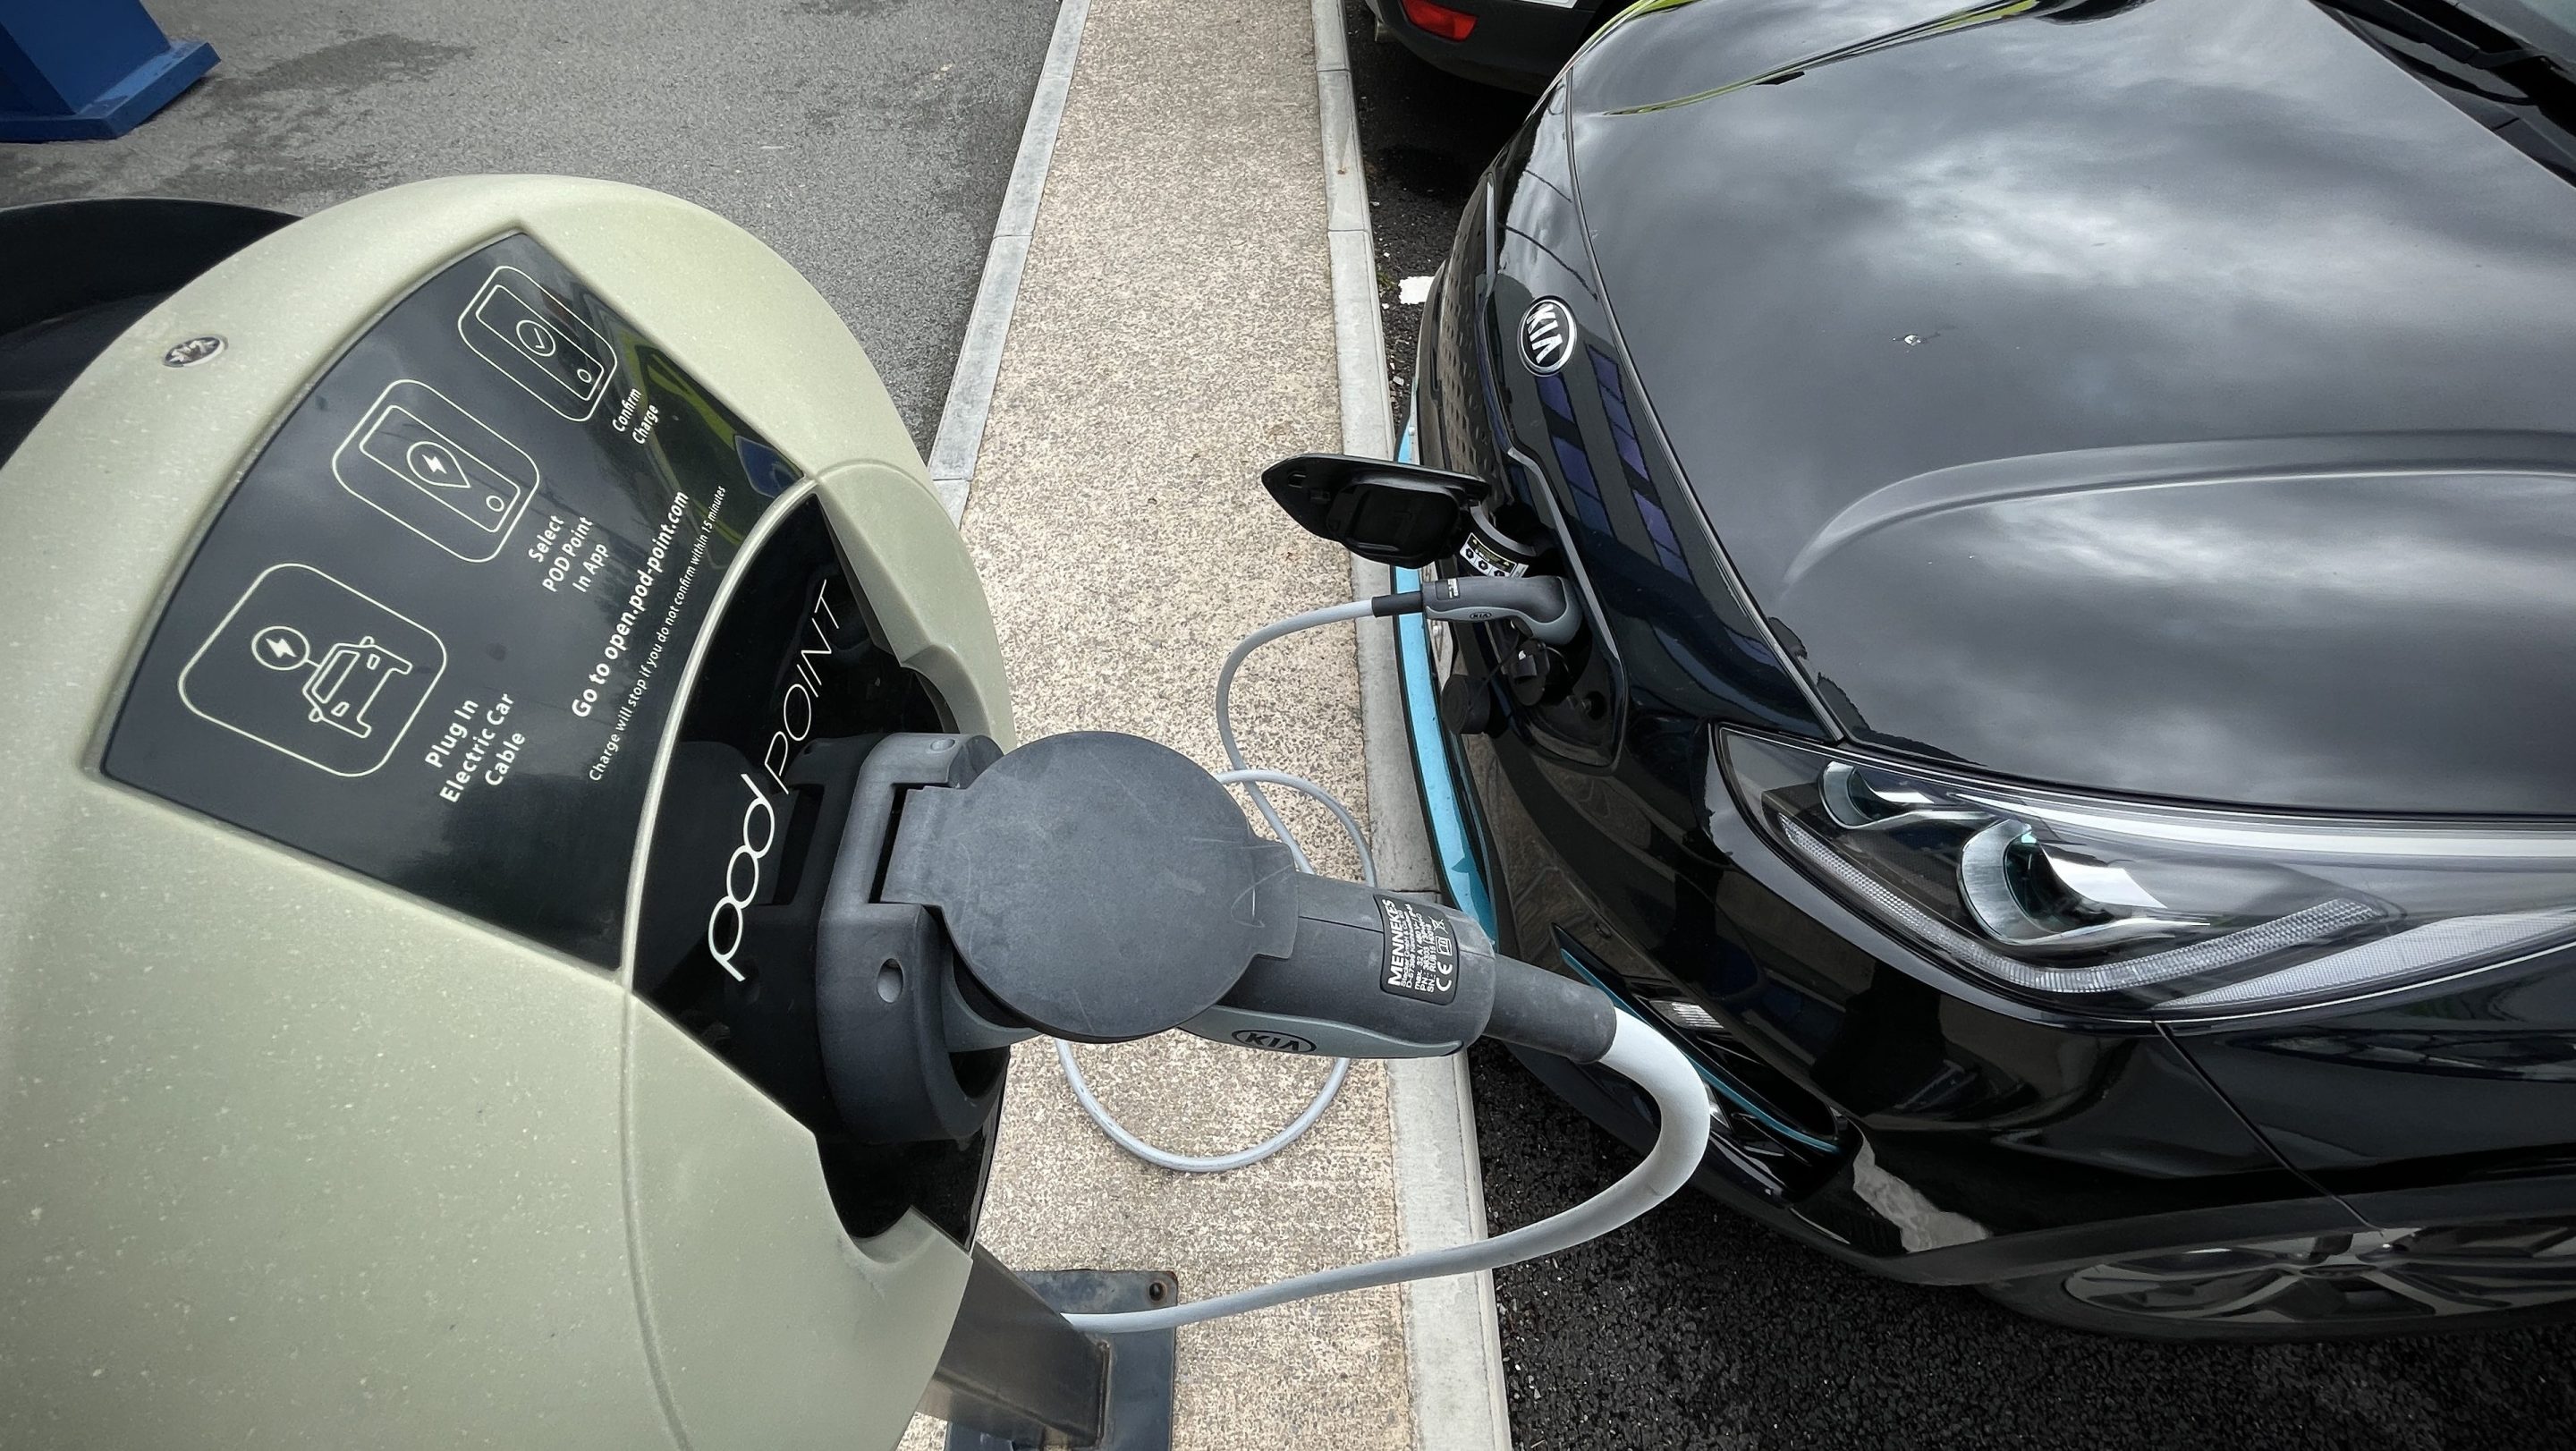 We can charge phones wirelessly. What about electric vehicles? - Marketplace